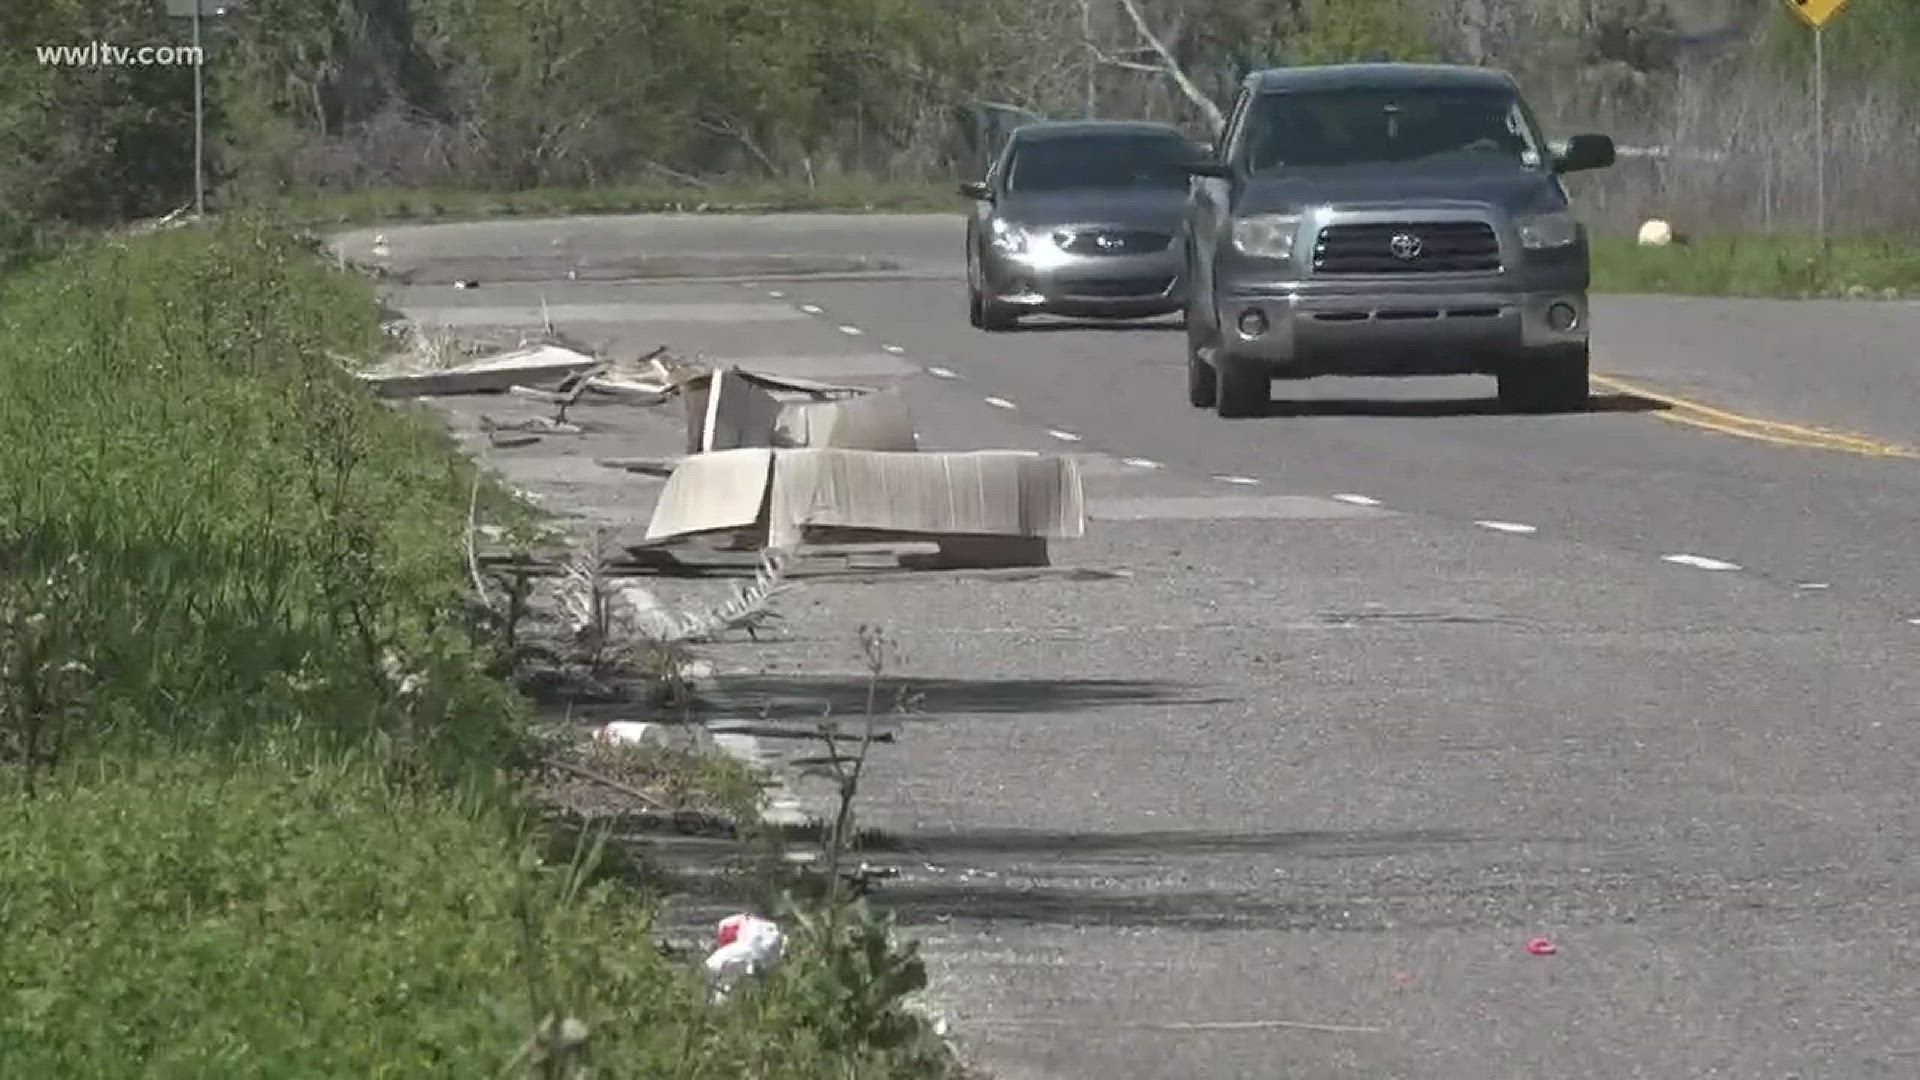 It's a problem Eyewitness News began highlighting nearly two months ago. Residents say the illegal dumping in New Orleans East is out of control, especially on the I-10 Service Road. Now the issue could be even worse than before.